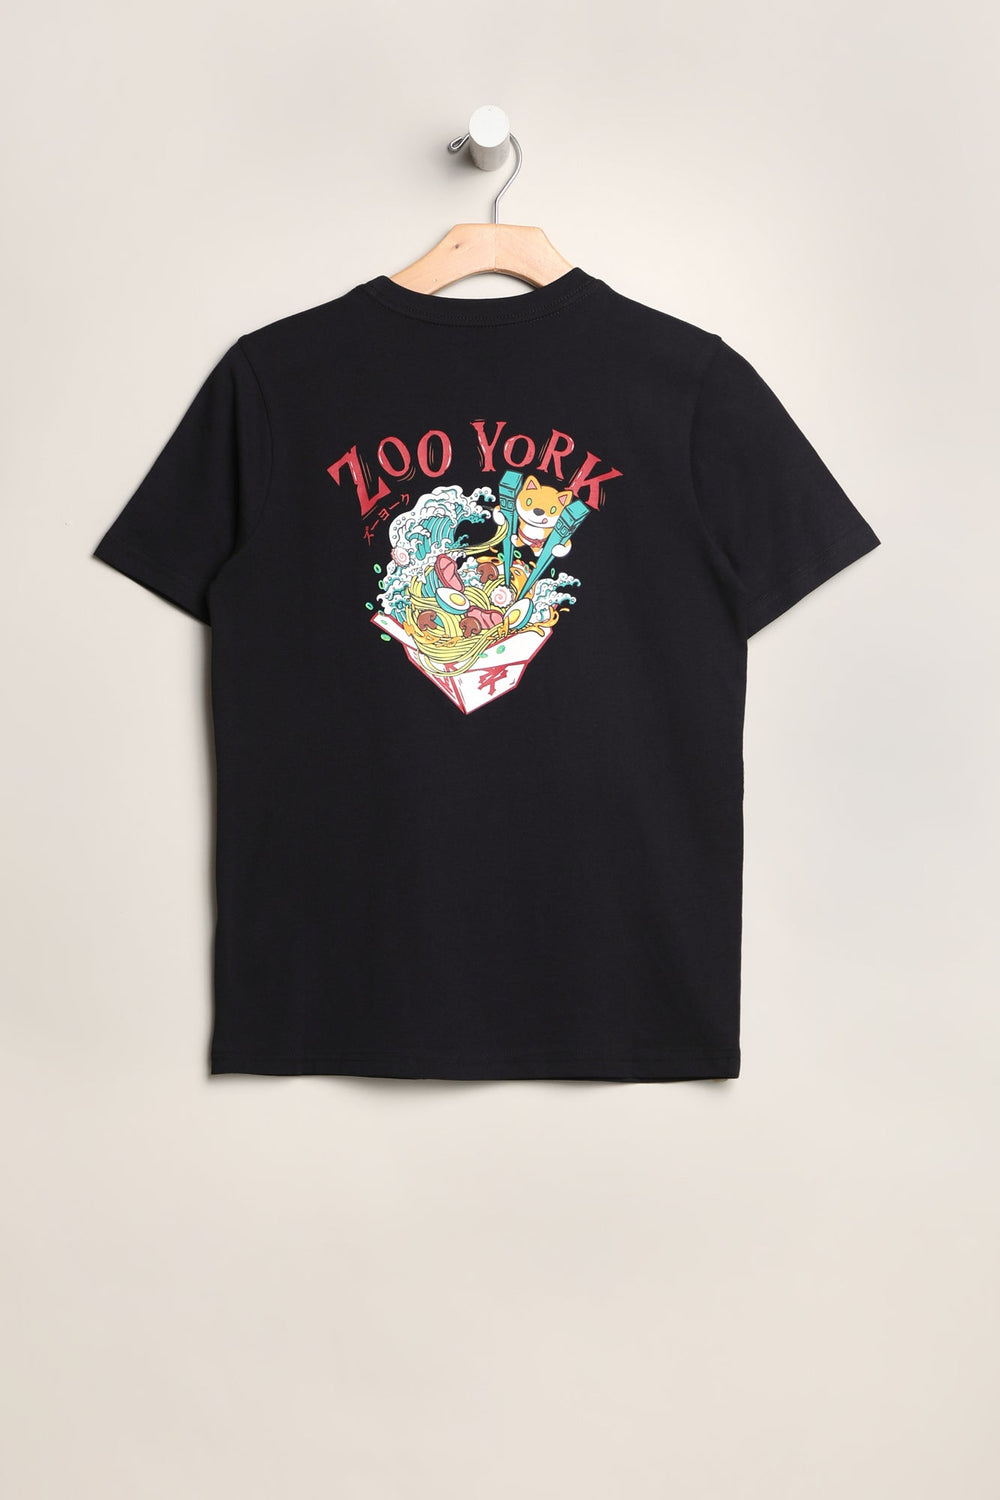 Zoo York Youth Takeout Noodles T-Shirt Zoo York Youth Takeout Noodles T-Shirt